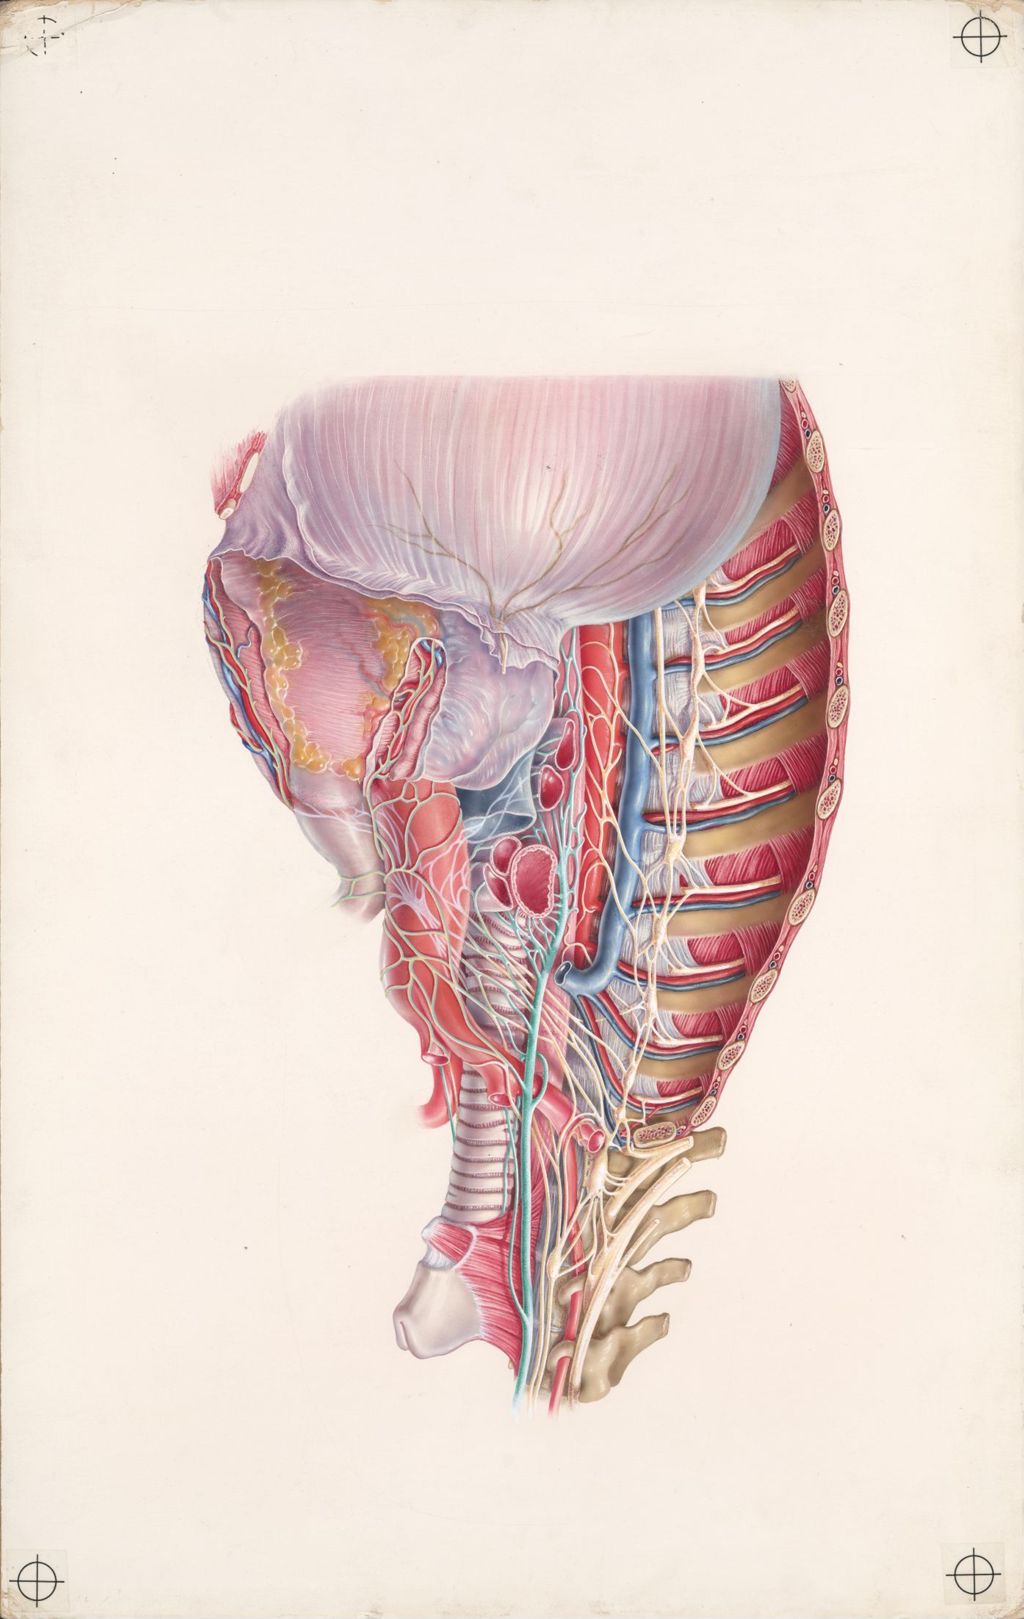 Explanatory Atlas of Anatomy, The autonomic innervation of the heart, Plate 1, The autonomic nervous system of the thorax